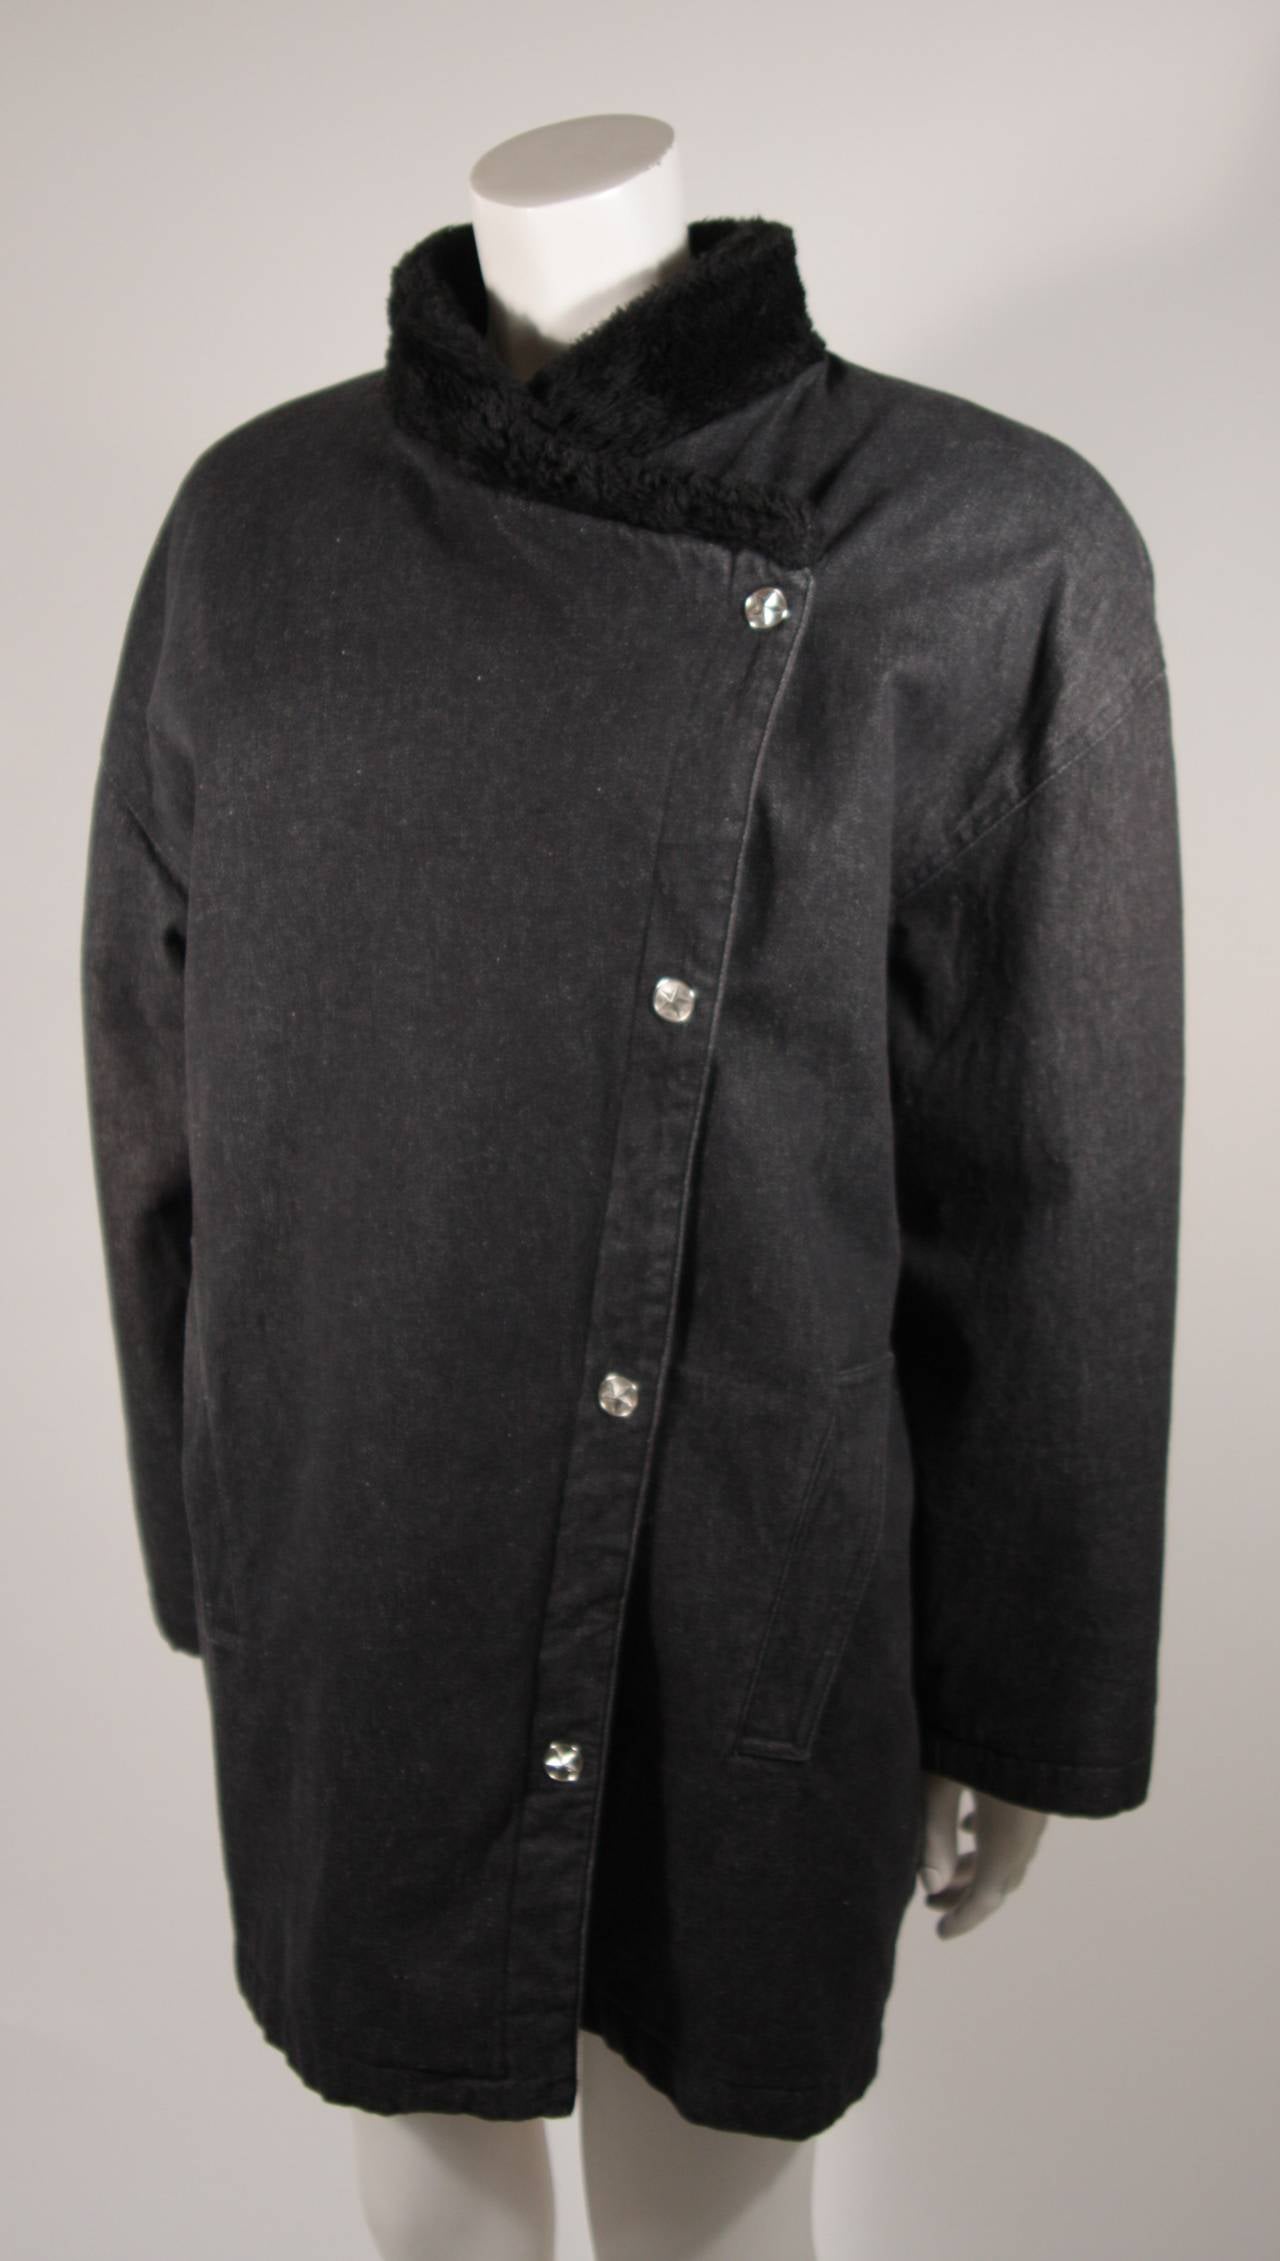 Black Theirry Mugler MEN'S Blue Jean Coat with Faux Fur Collar Size 42